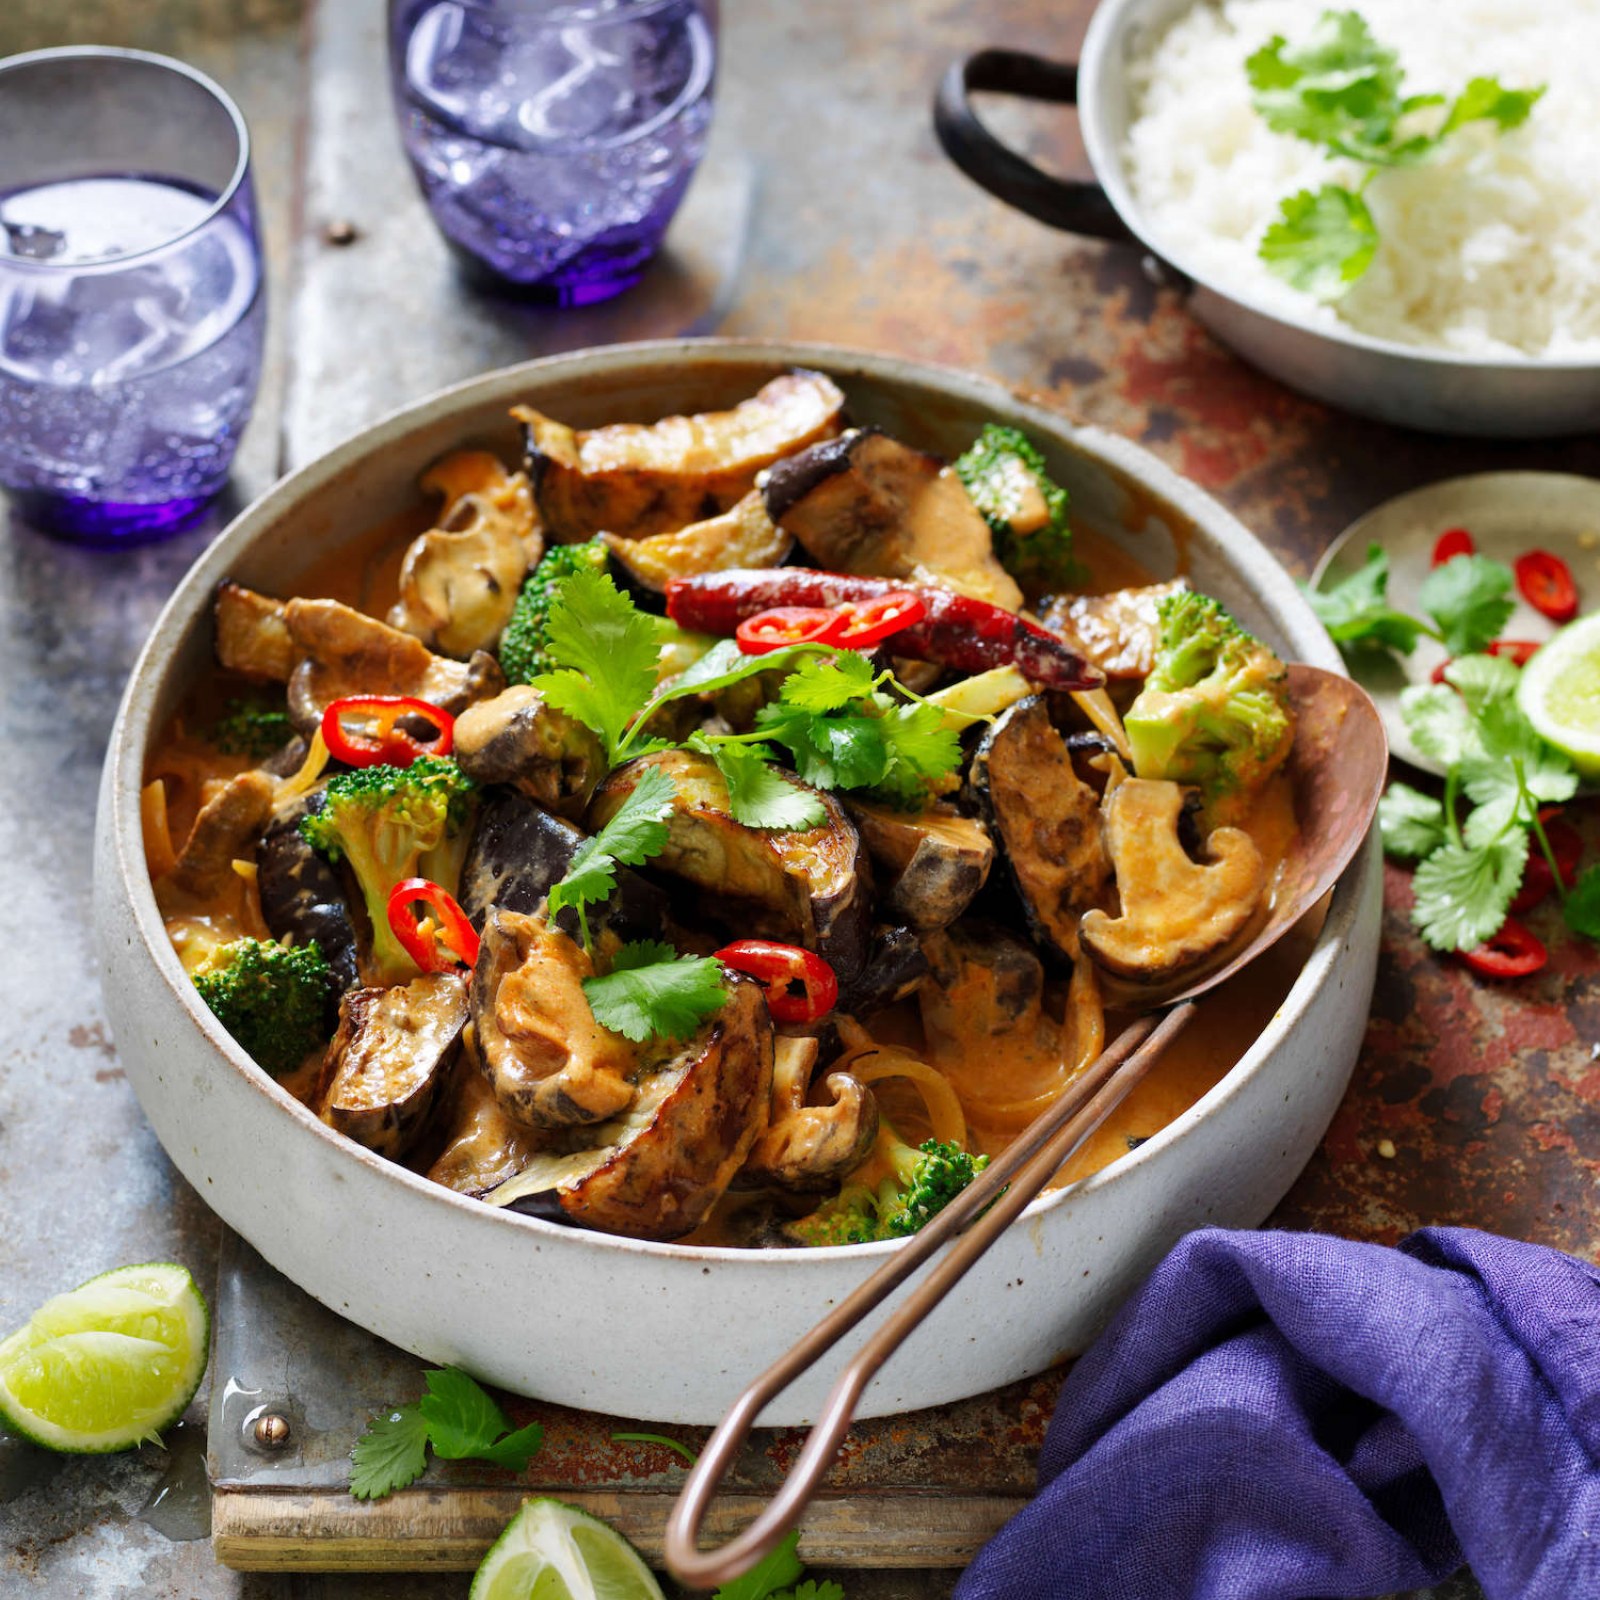 12 different types of mushrooms, Cook Free Recipes from Australia's Best  Brands